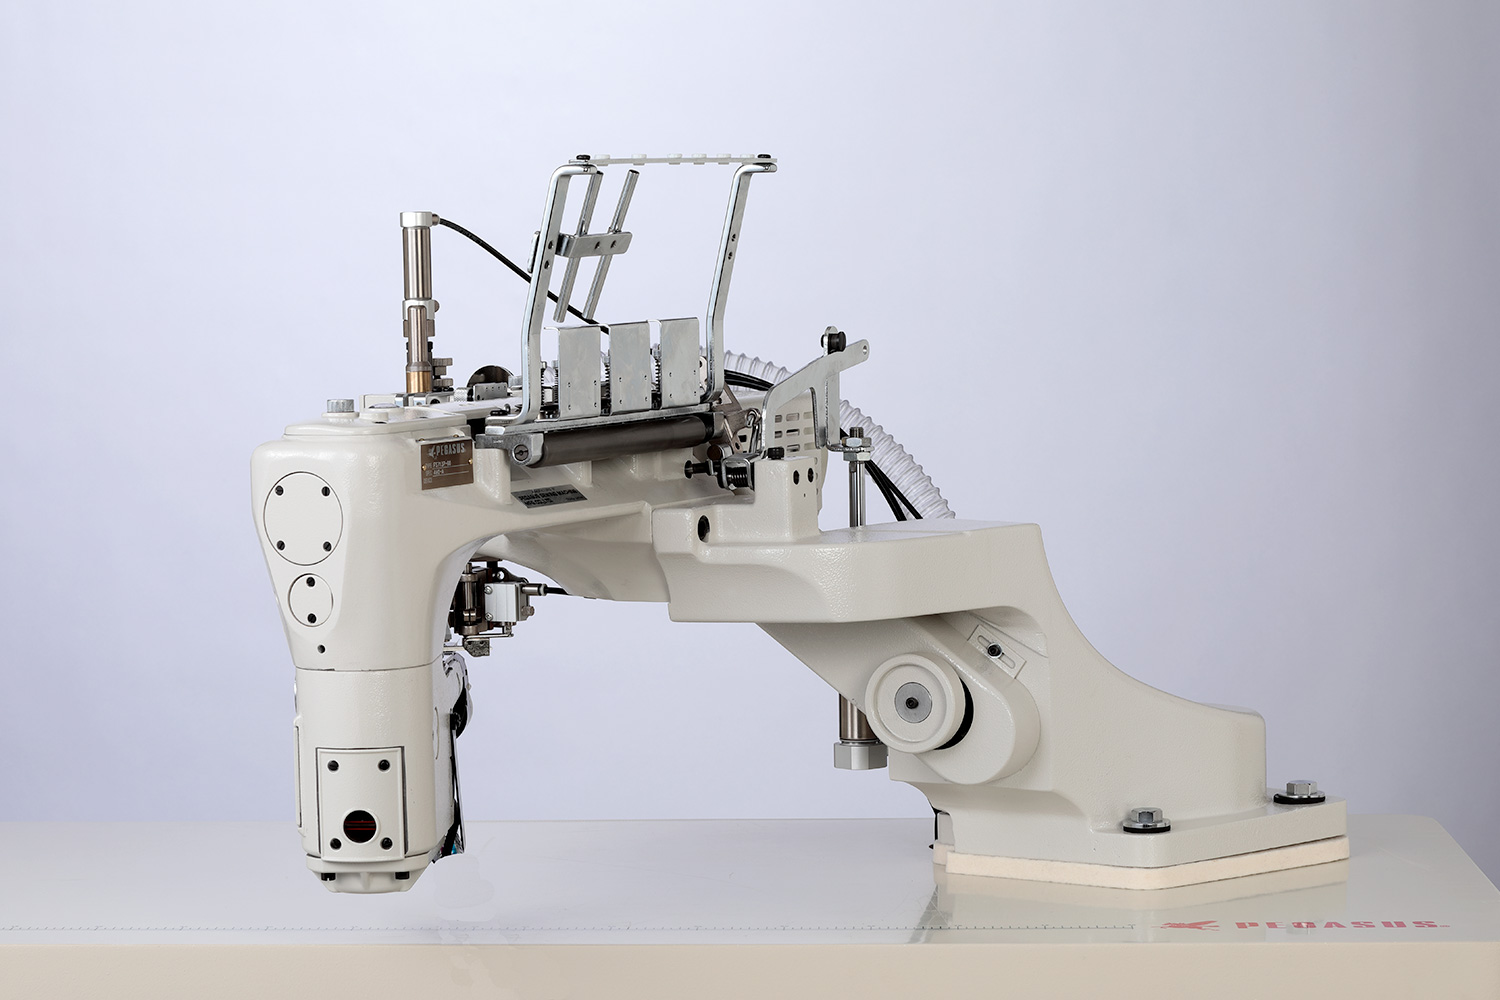 FS700P ： Feed-off-the-arm, cylinder bed, 4-needle interlock stitch machines for flat seaming